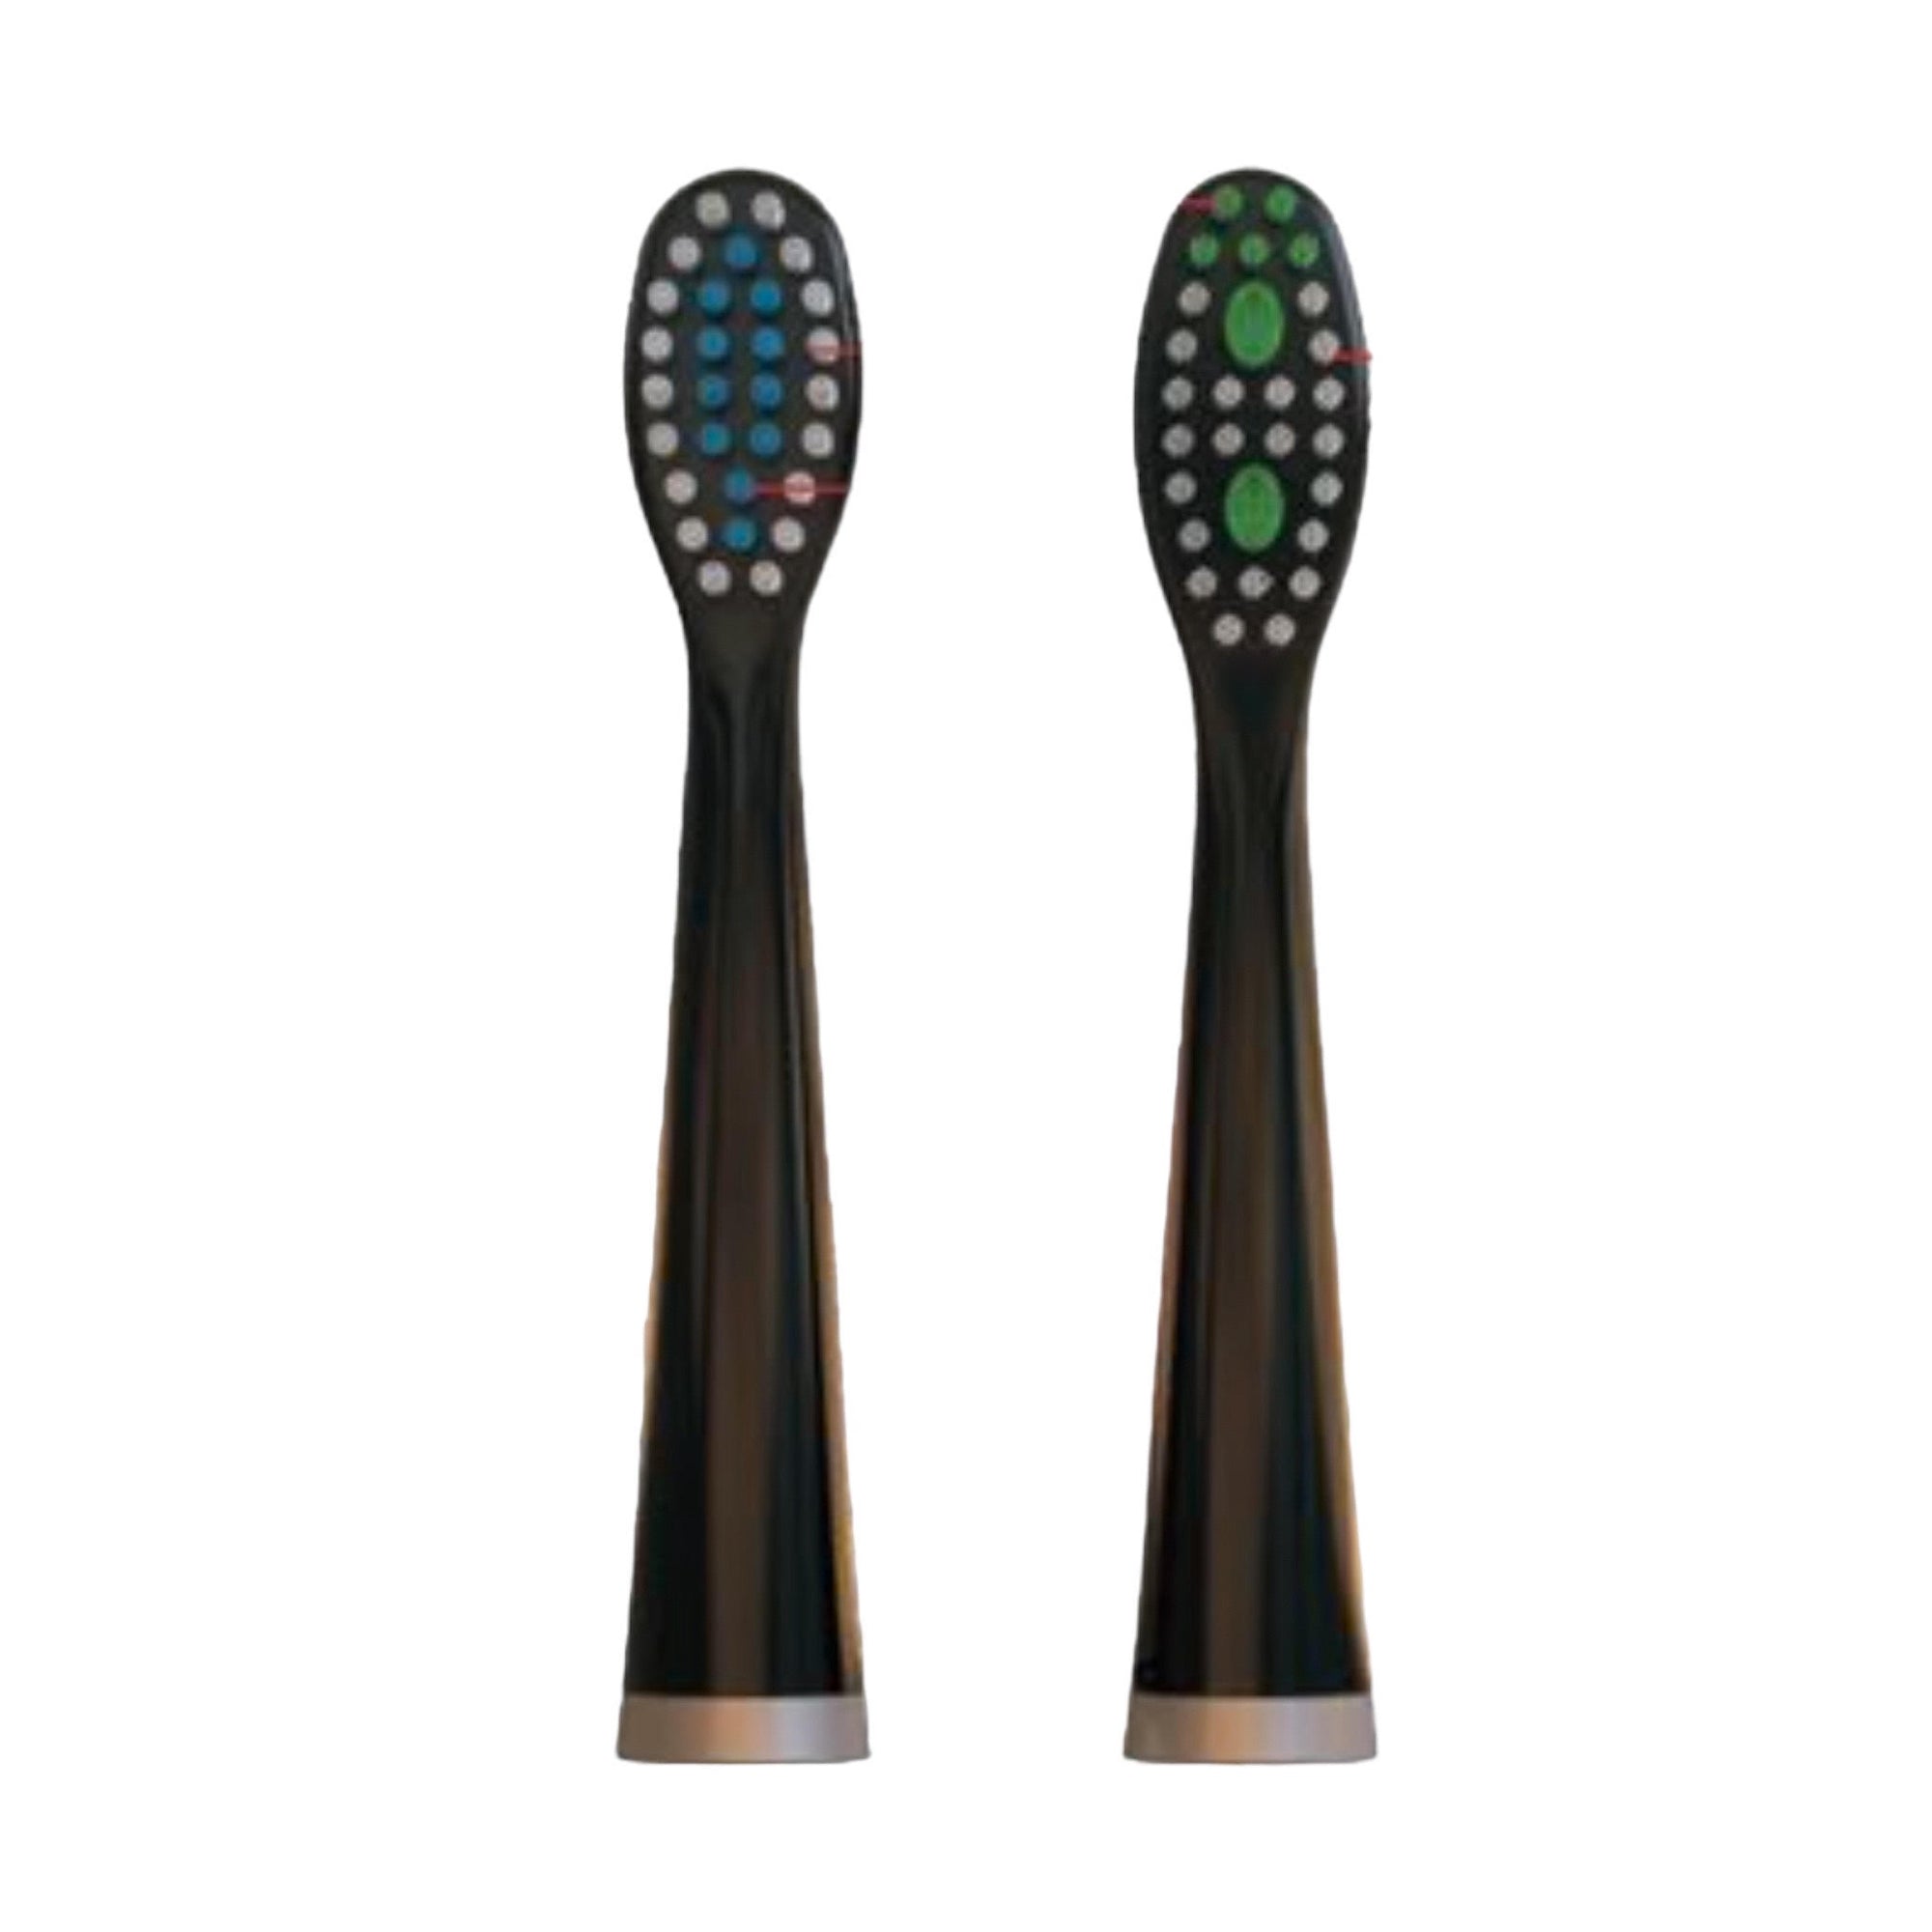 Oral Care Club Sonic Toothbrush Replacement Heads (Black 2-Pack)